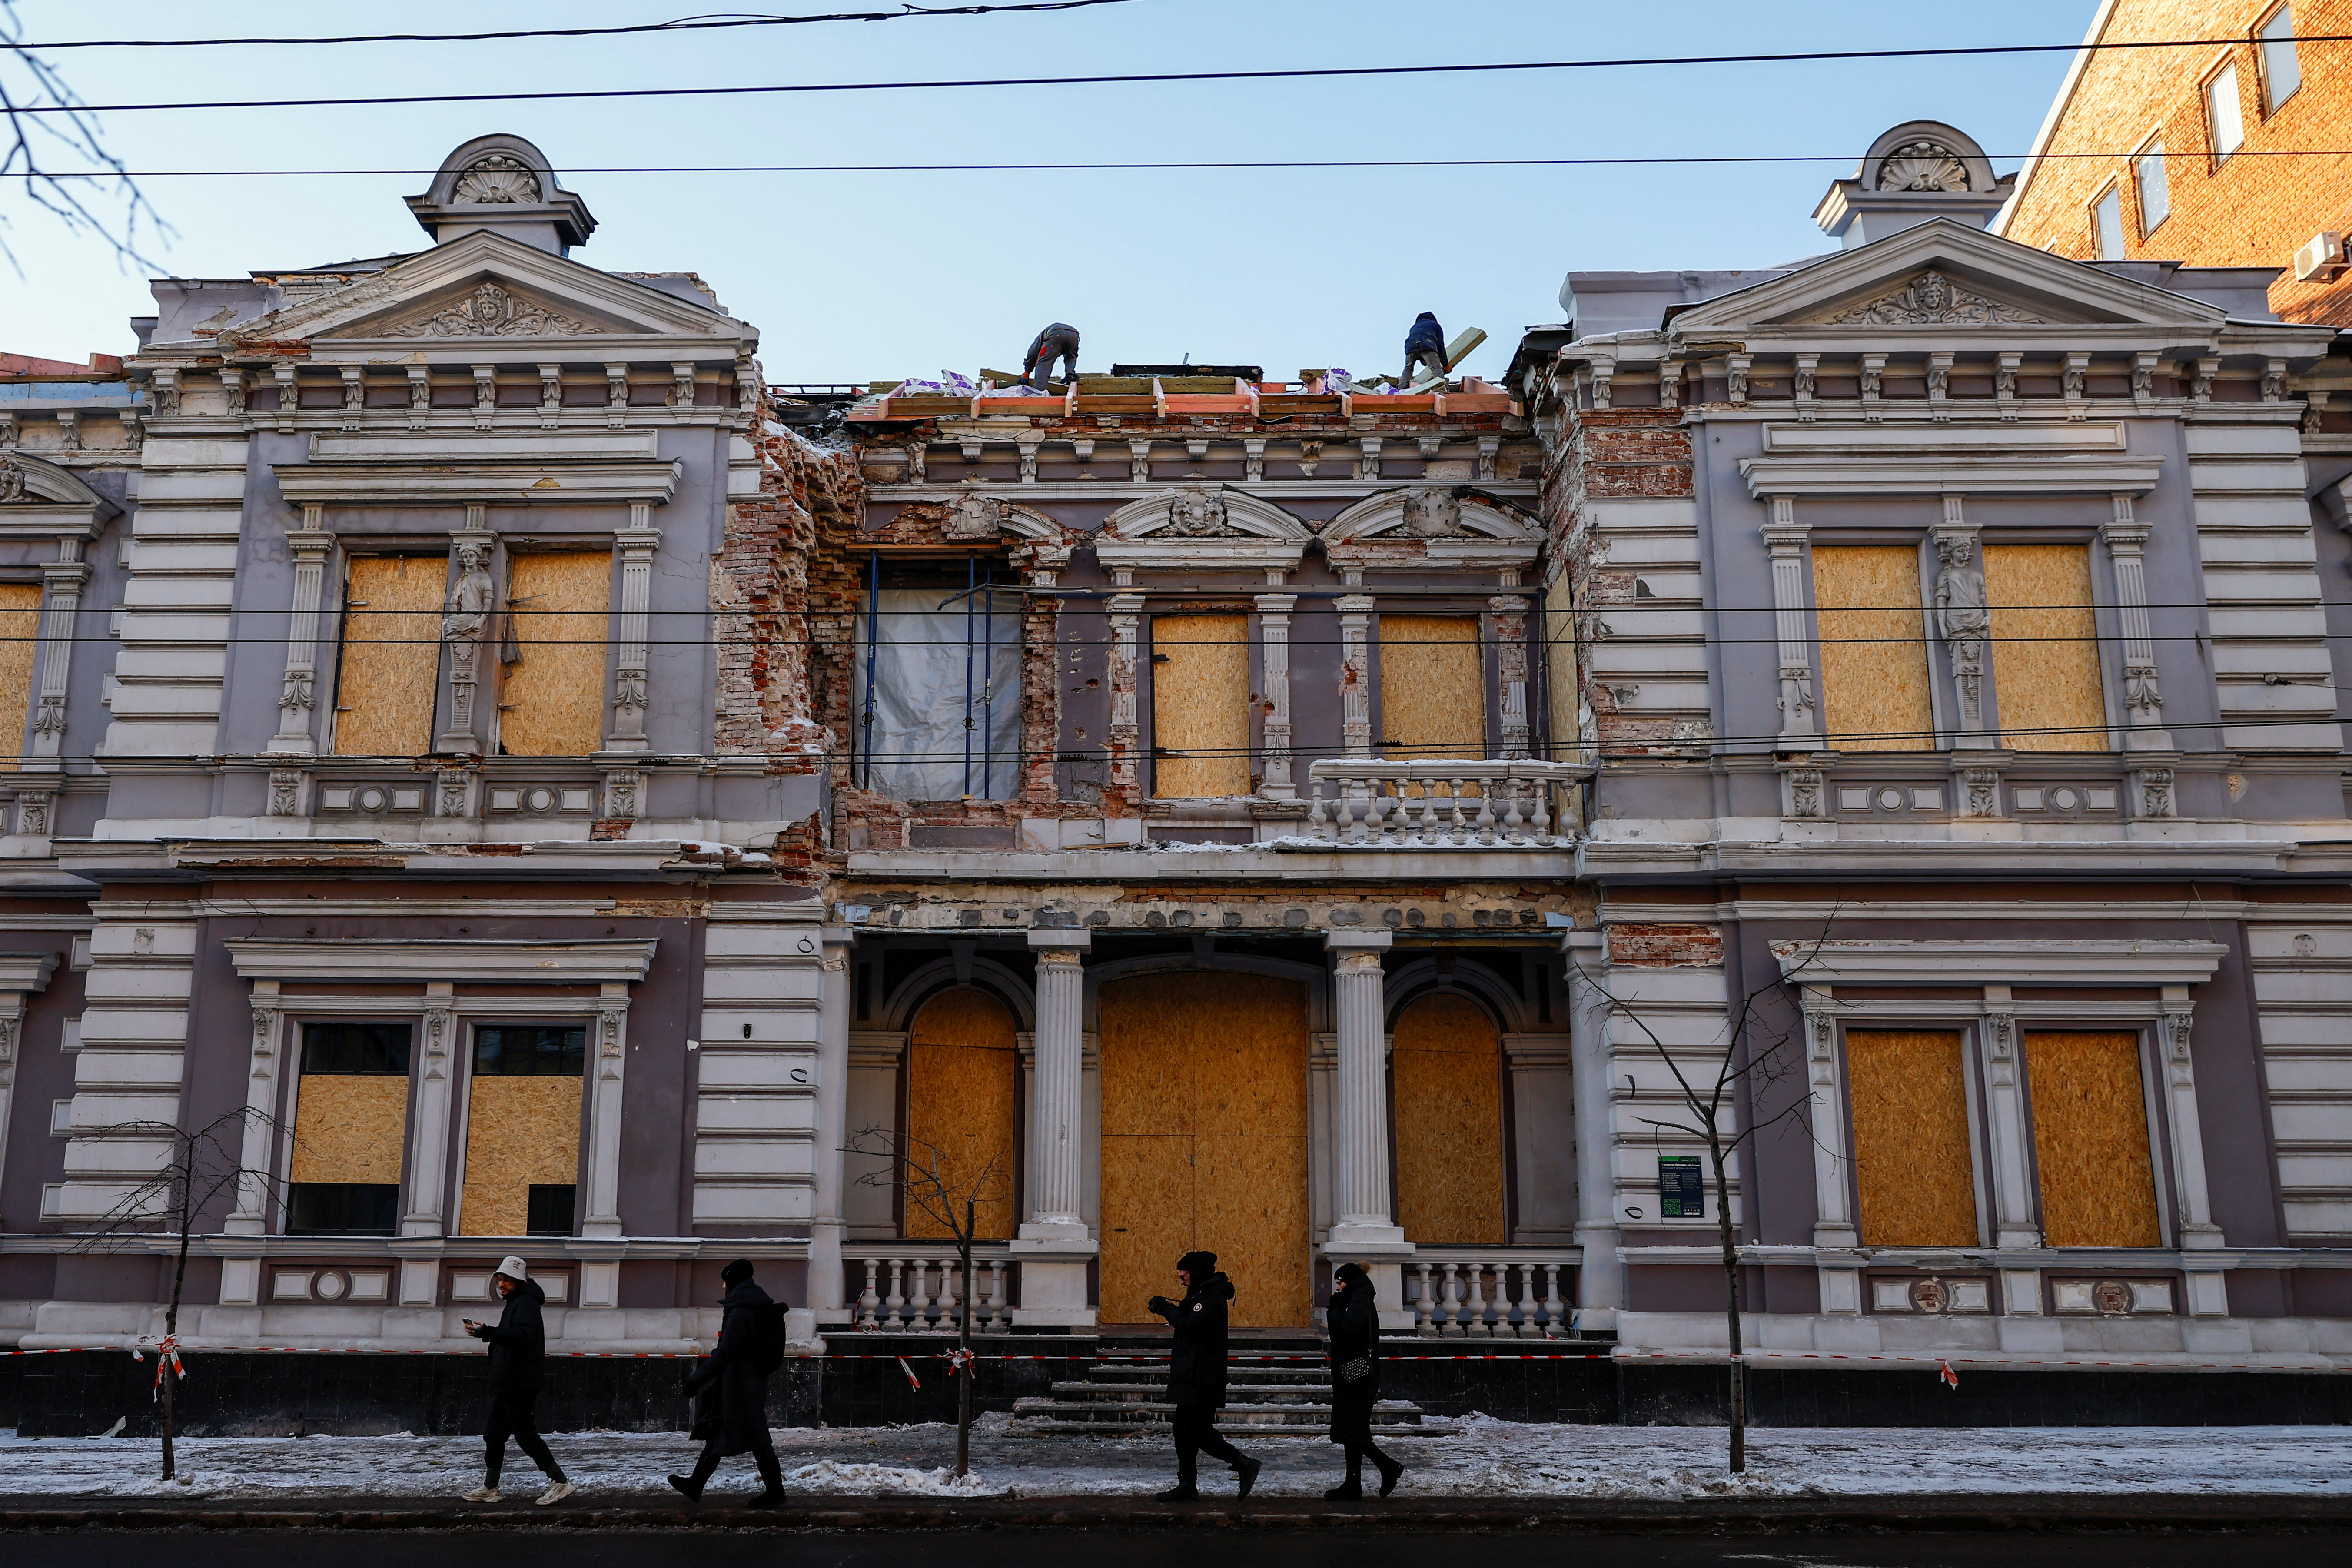 People walk past as workers repair the roof of a historical building, damaged during one of the latest Russian drone strikes, in Kharkiv